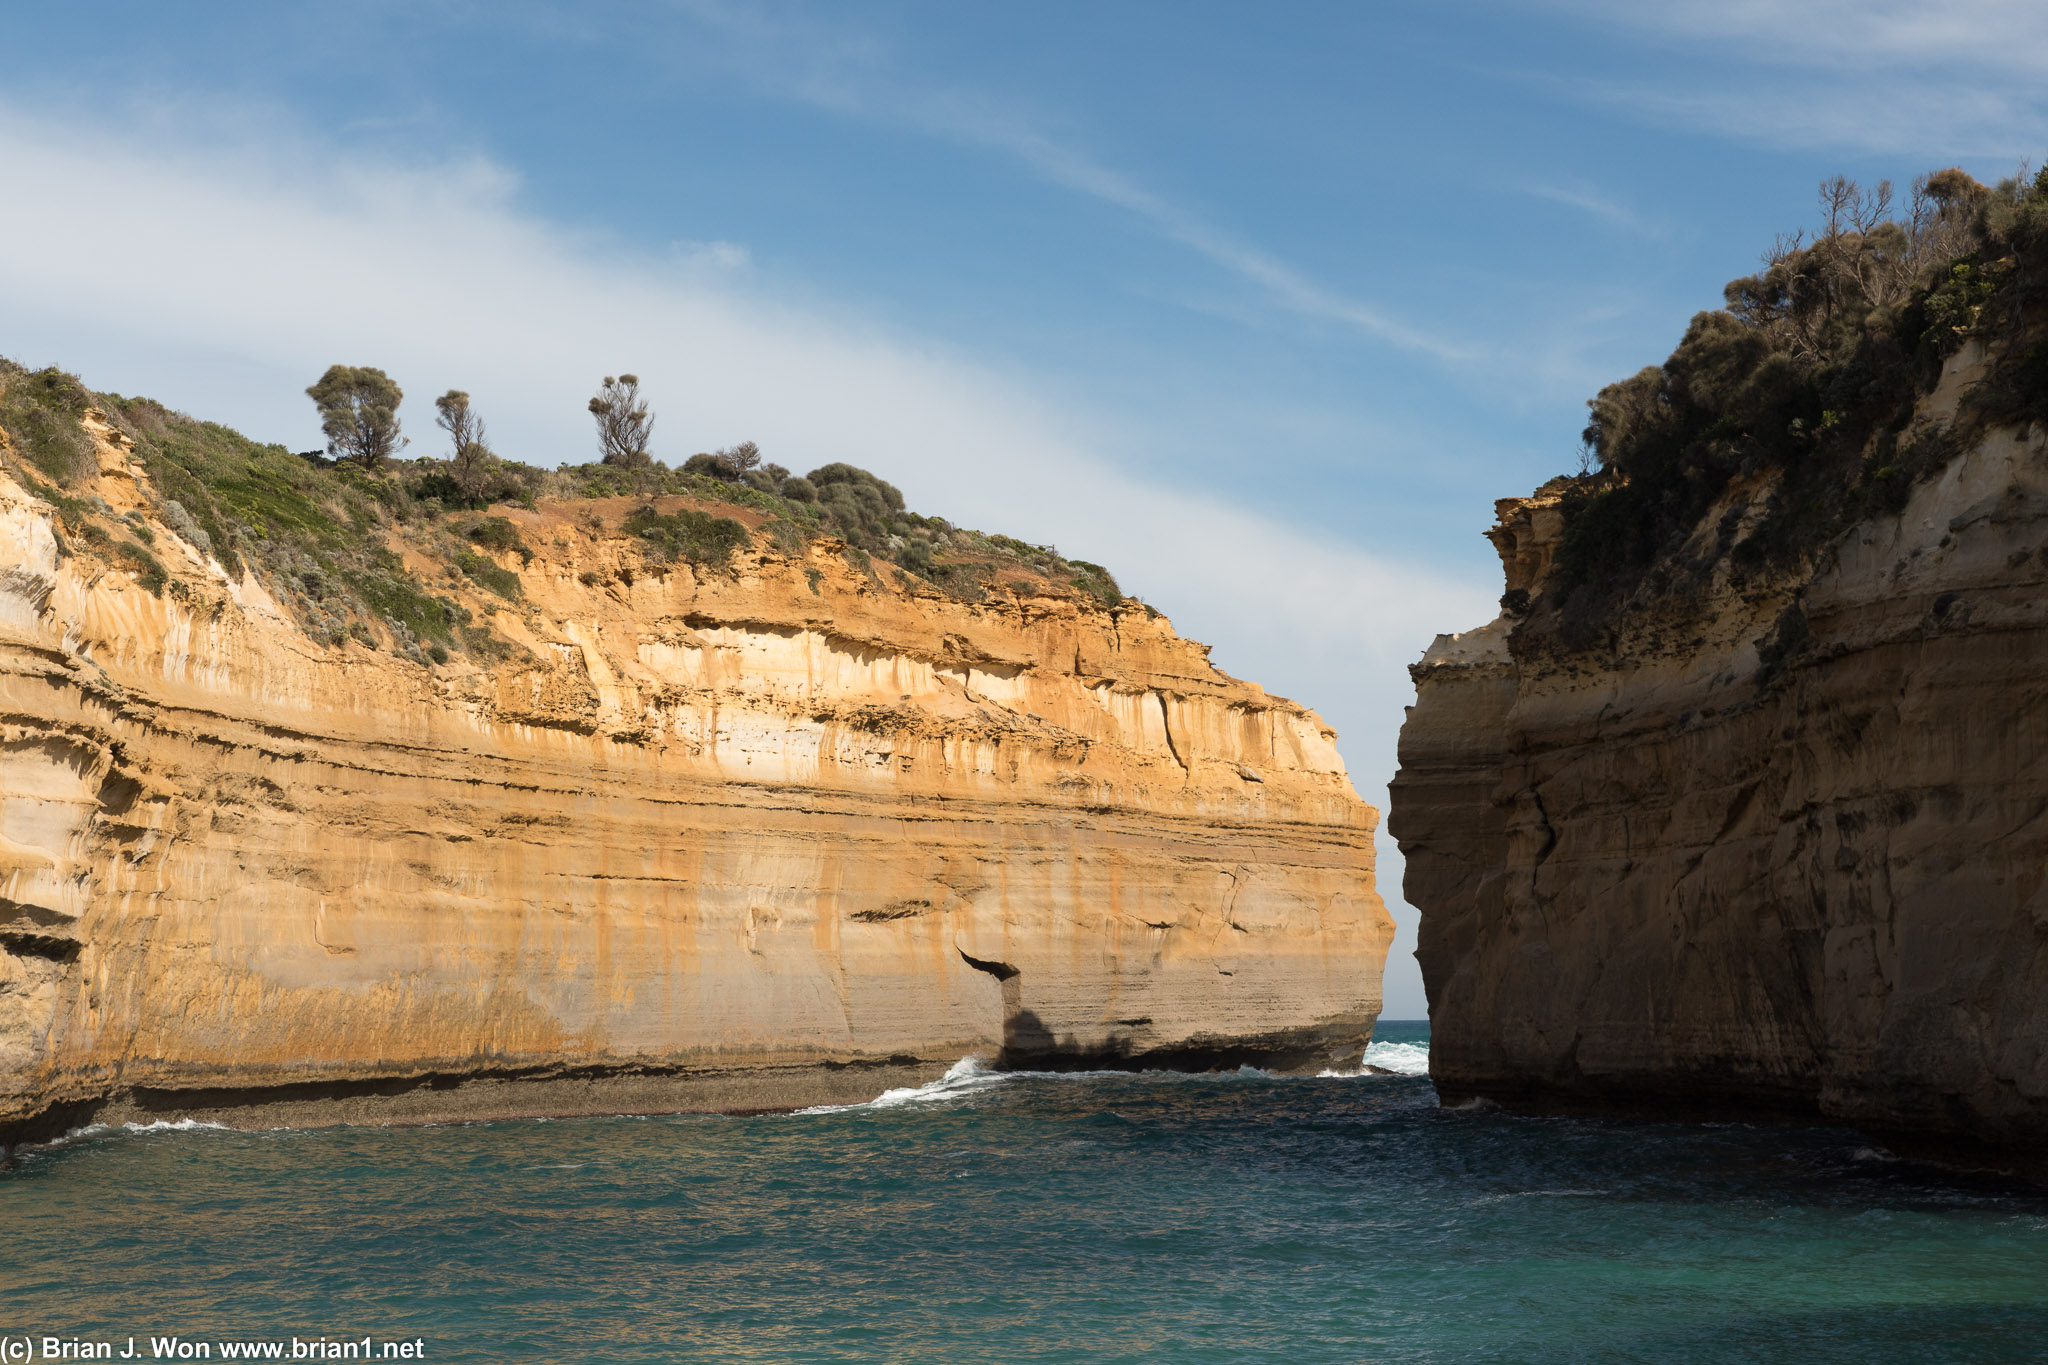 Dramatic cliffs protect this tiny bay.